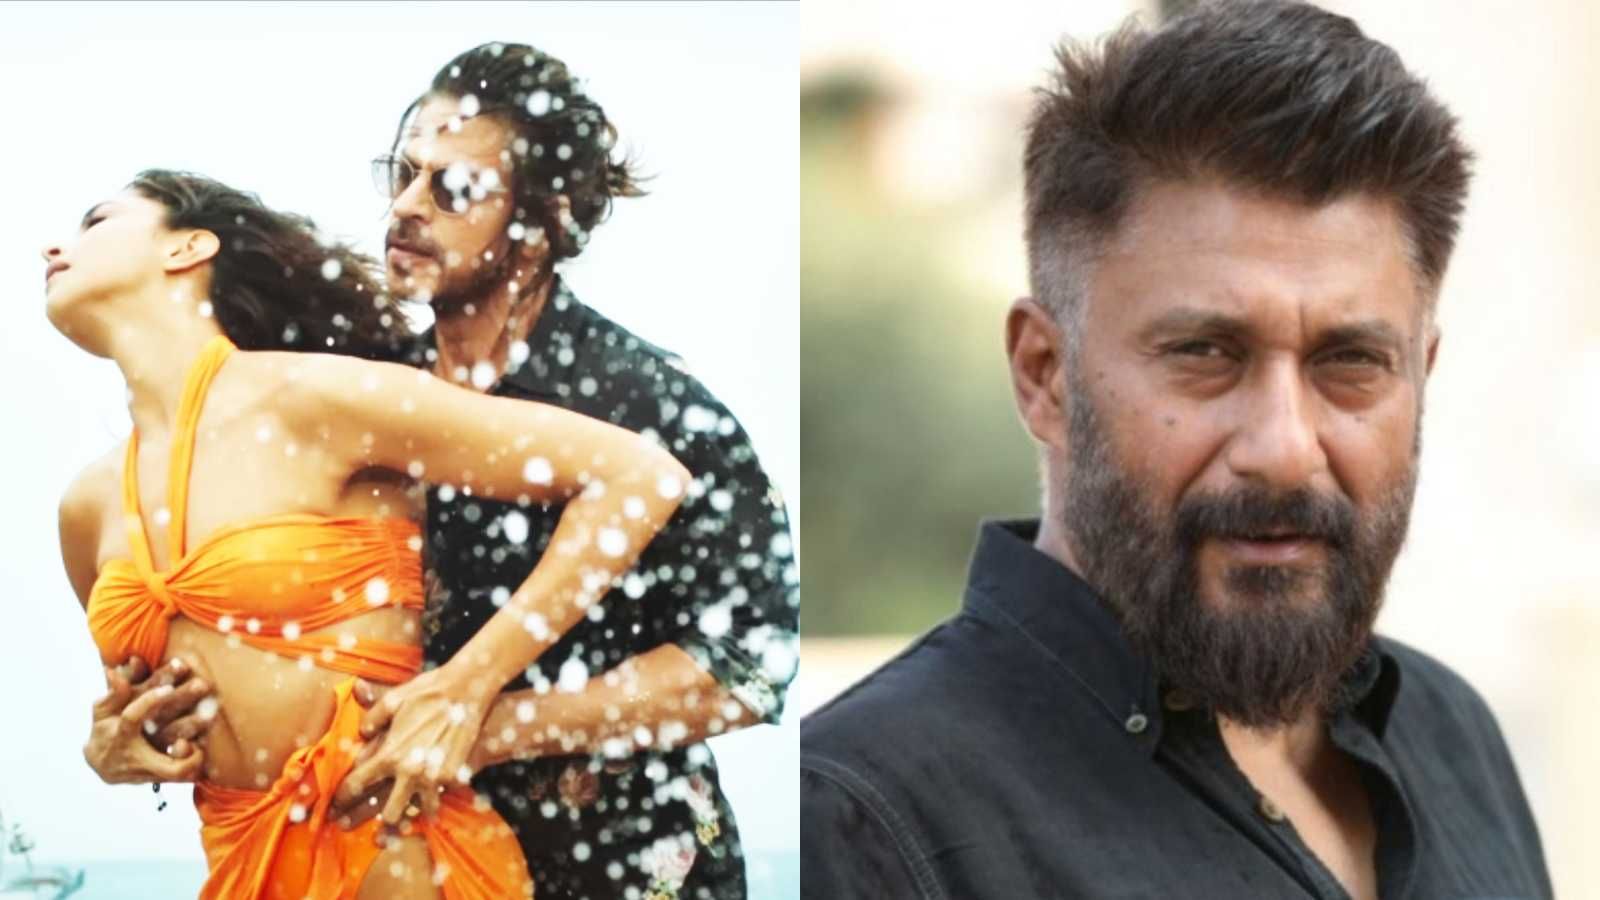 Vivek Agnihotri takes a dig at Shah Rukh Khan's 'positivity' as actor's fans send him abusive messages amidst Pathaan row